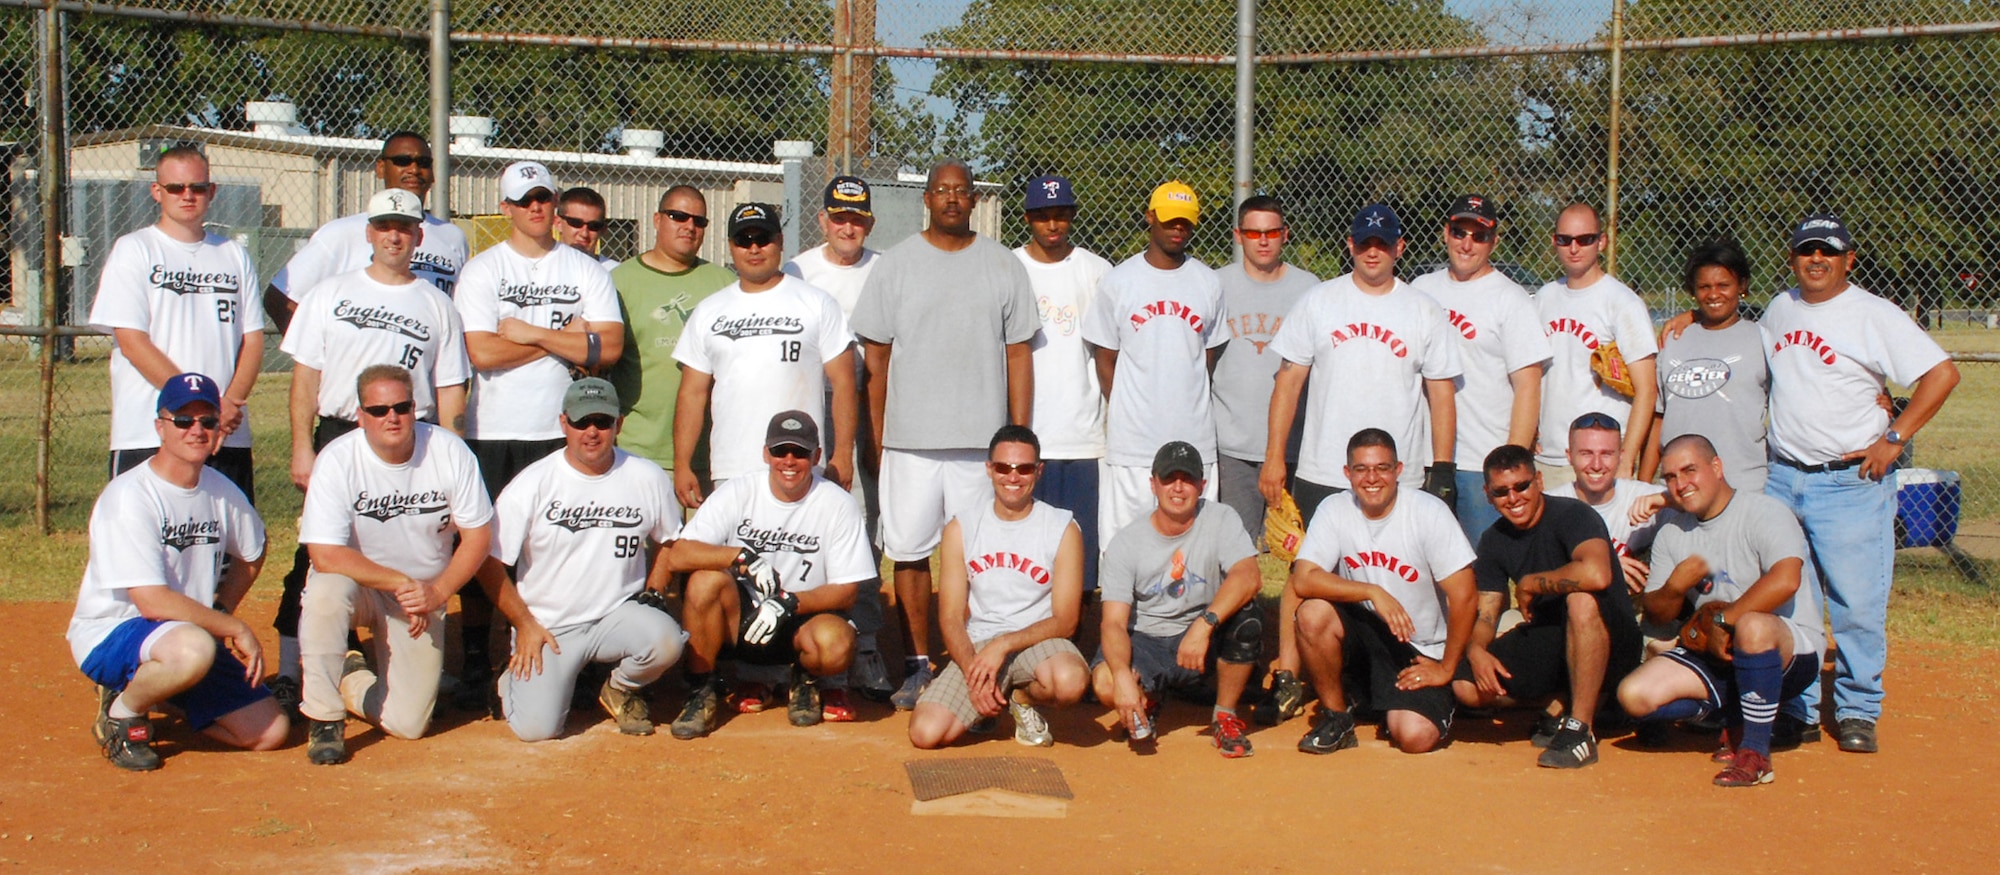 301st Civil Engineer Squadron (left half) took on the Ammo team (right half) and won this year?s Annual Family Day Picnic Softball Tournament. The two teams went head to head and CE won by more than double the point spread with a final score of 27 - 11. CES, whose playoff score averaged 30 points a game, now holds the bragging rights for the next year. (U.S. Air Force Photo/Lt. Col. John Moyer) 